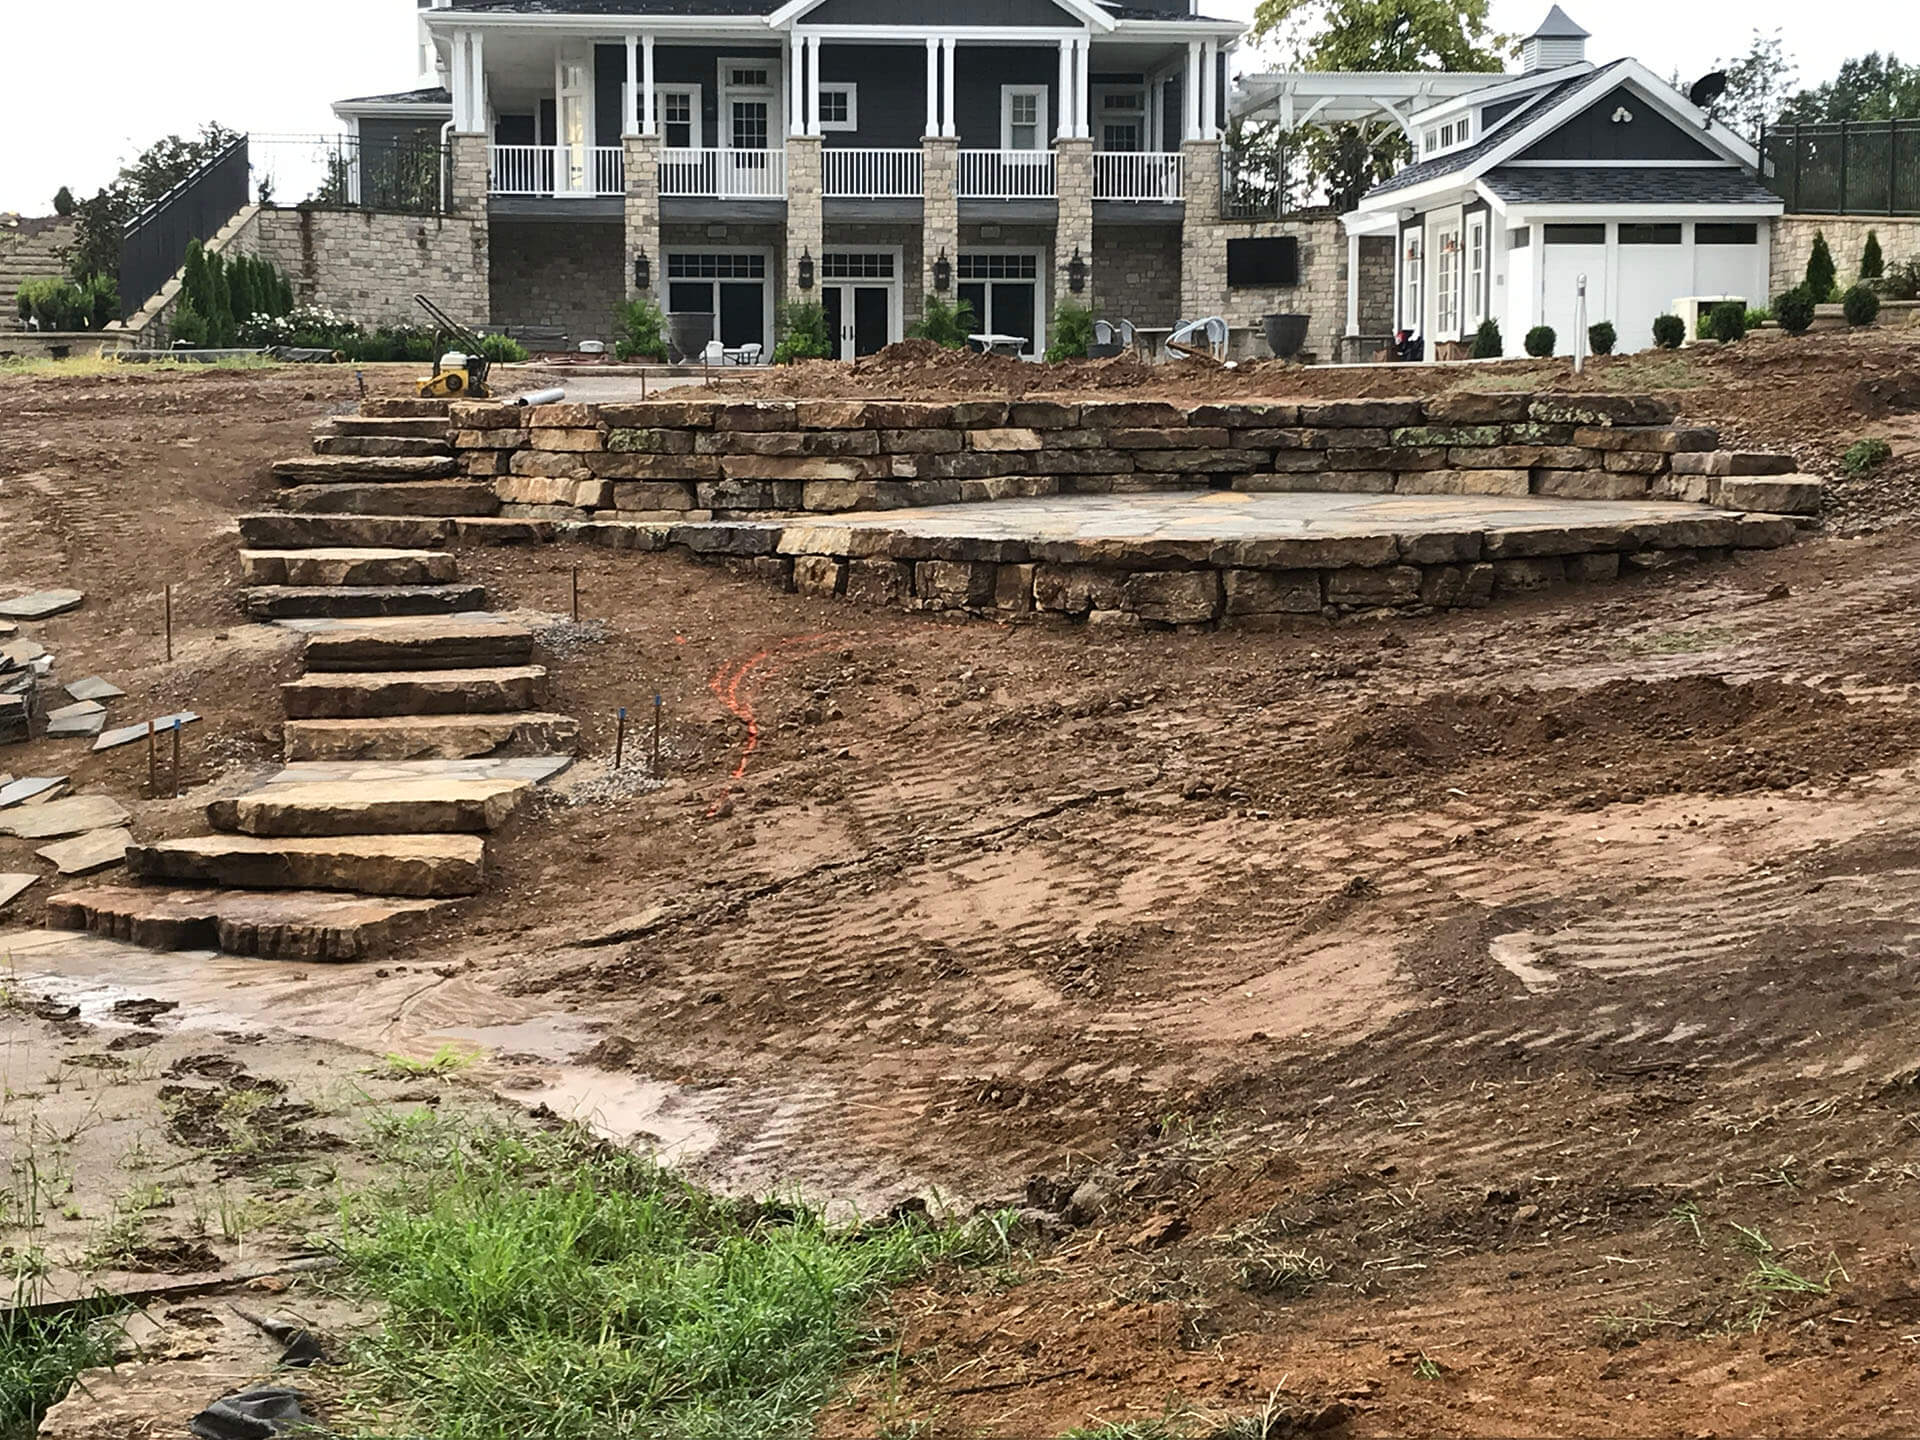 landscaping wiht stone patio and walkways Dexter, MO Project